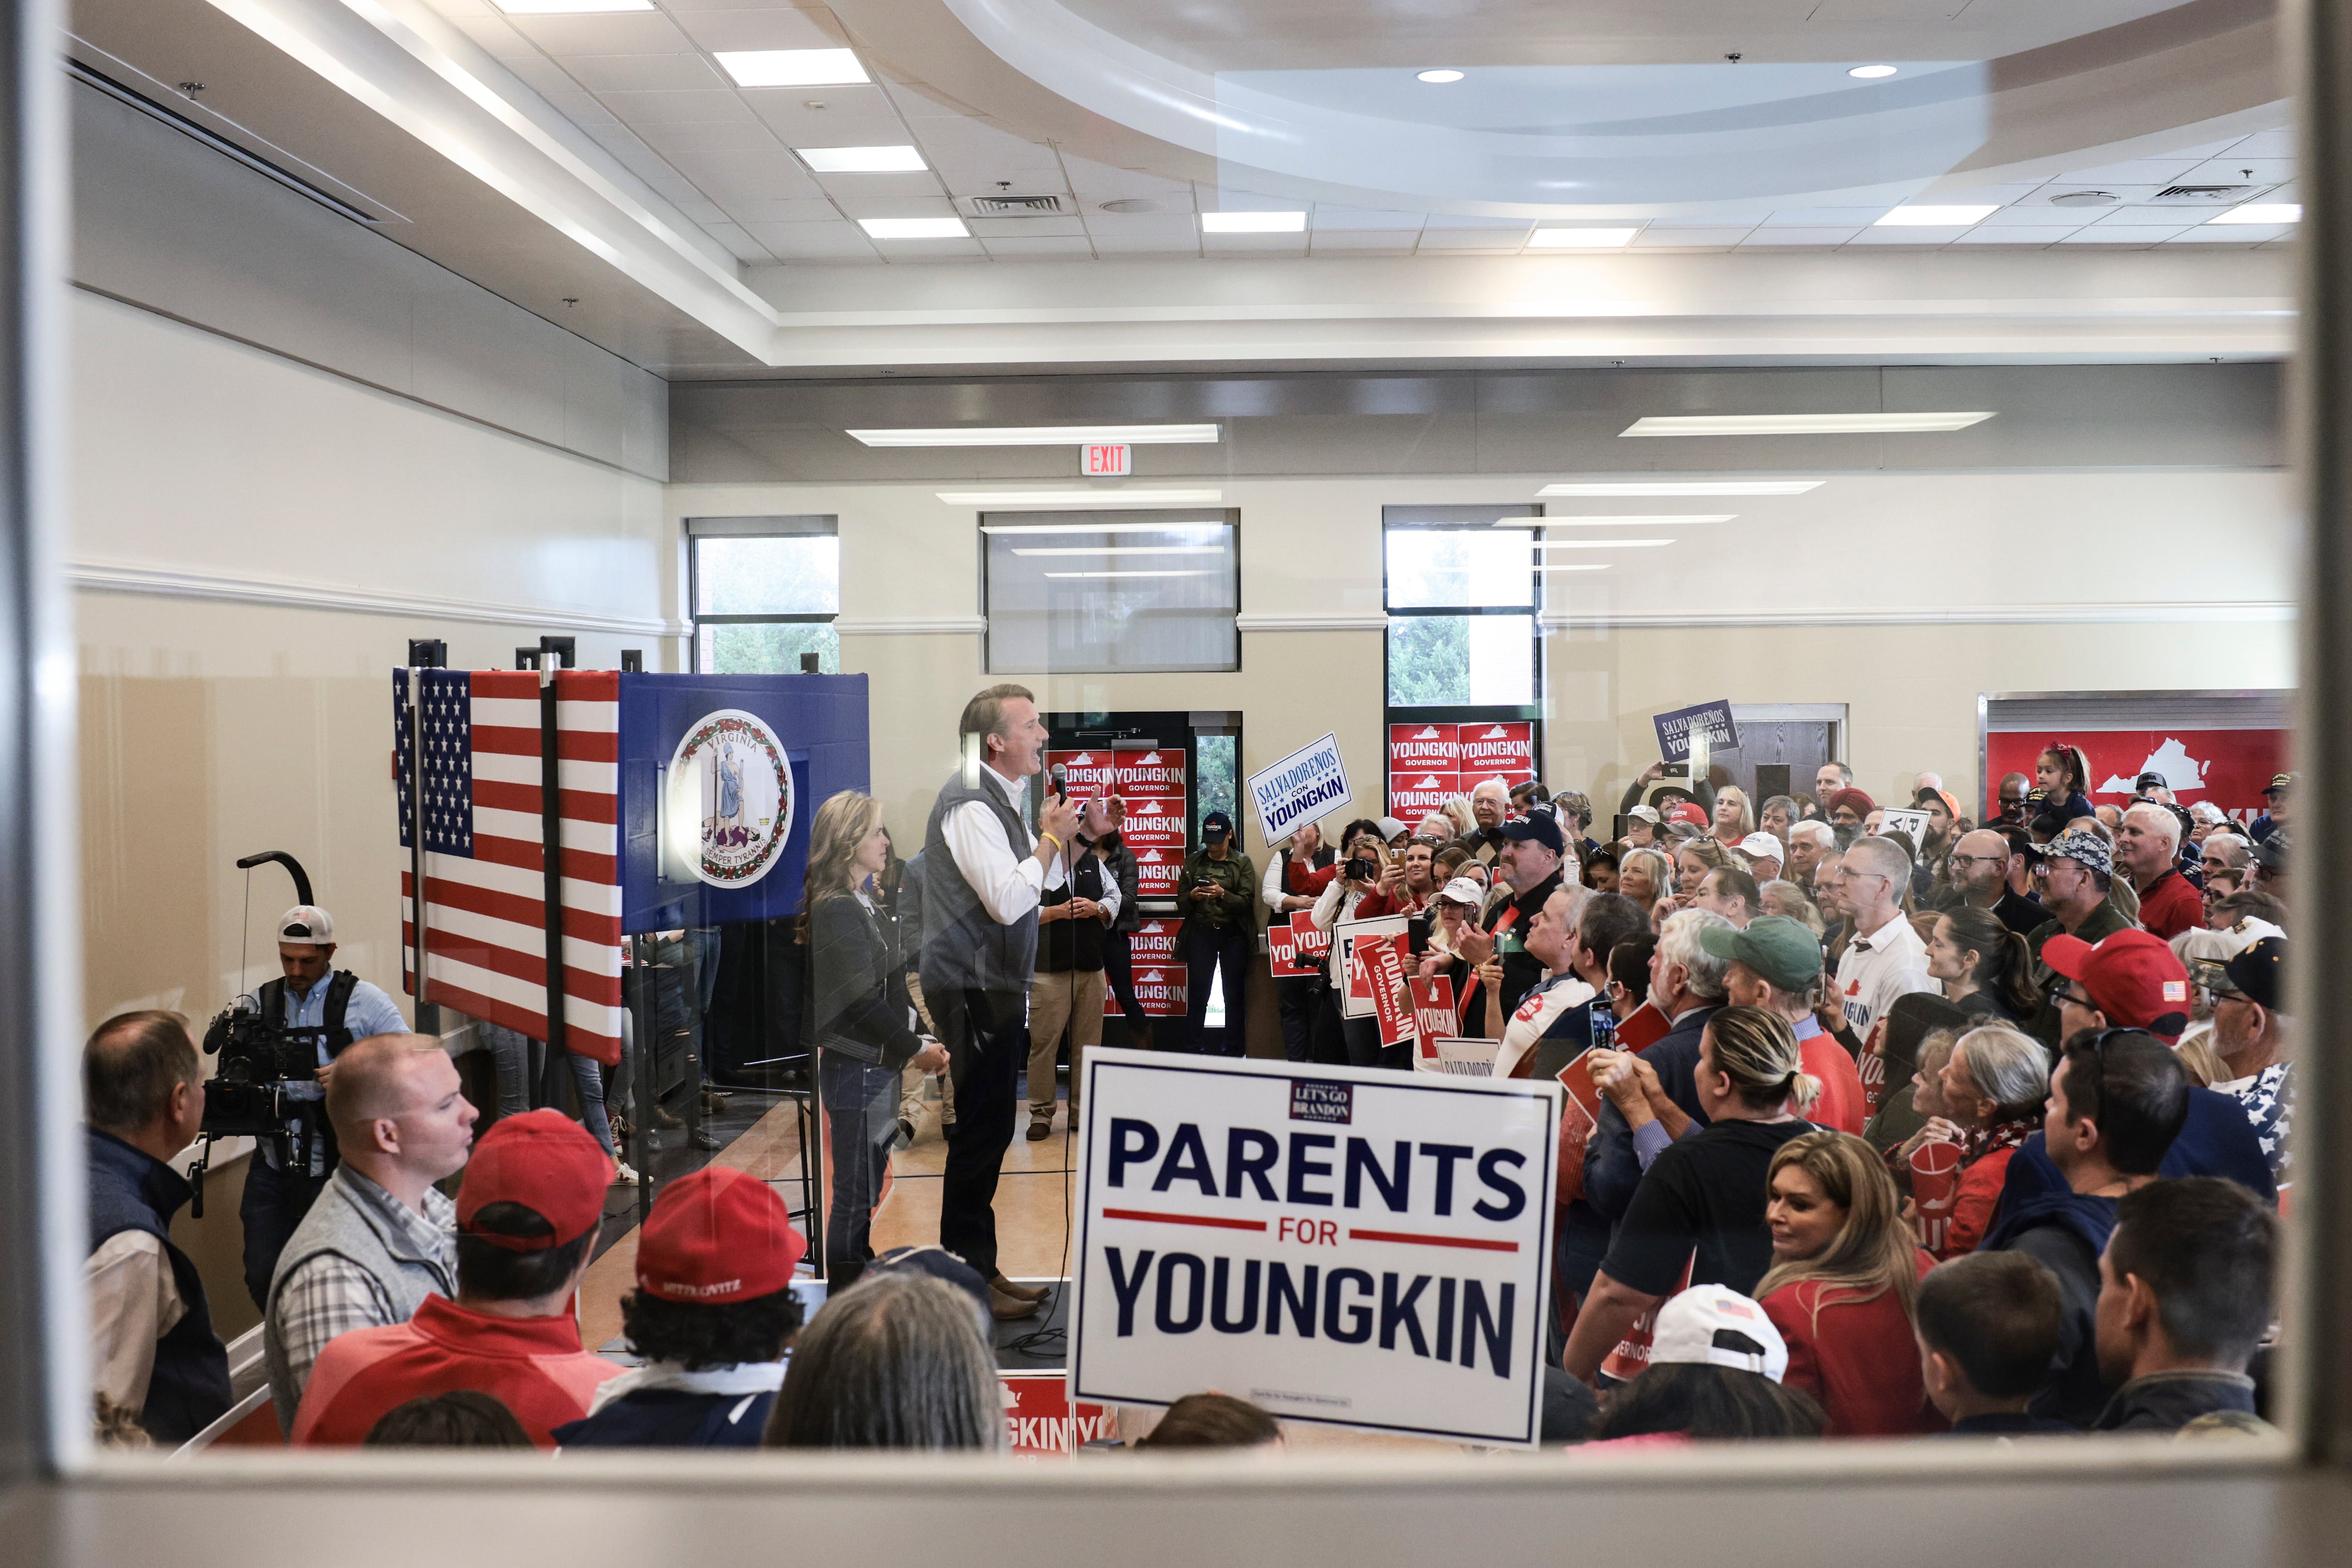 Virginia Governor-elect Glenn Youngkin speaks at an indoor rally, shown behind a glass window. A sign reading “Parents for Youngkin” sits in the foreground by the window.